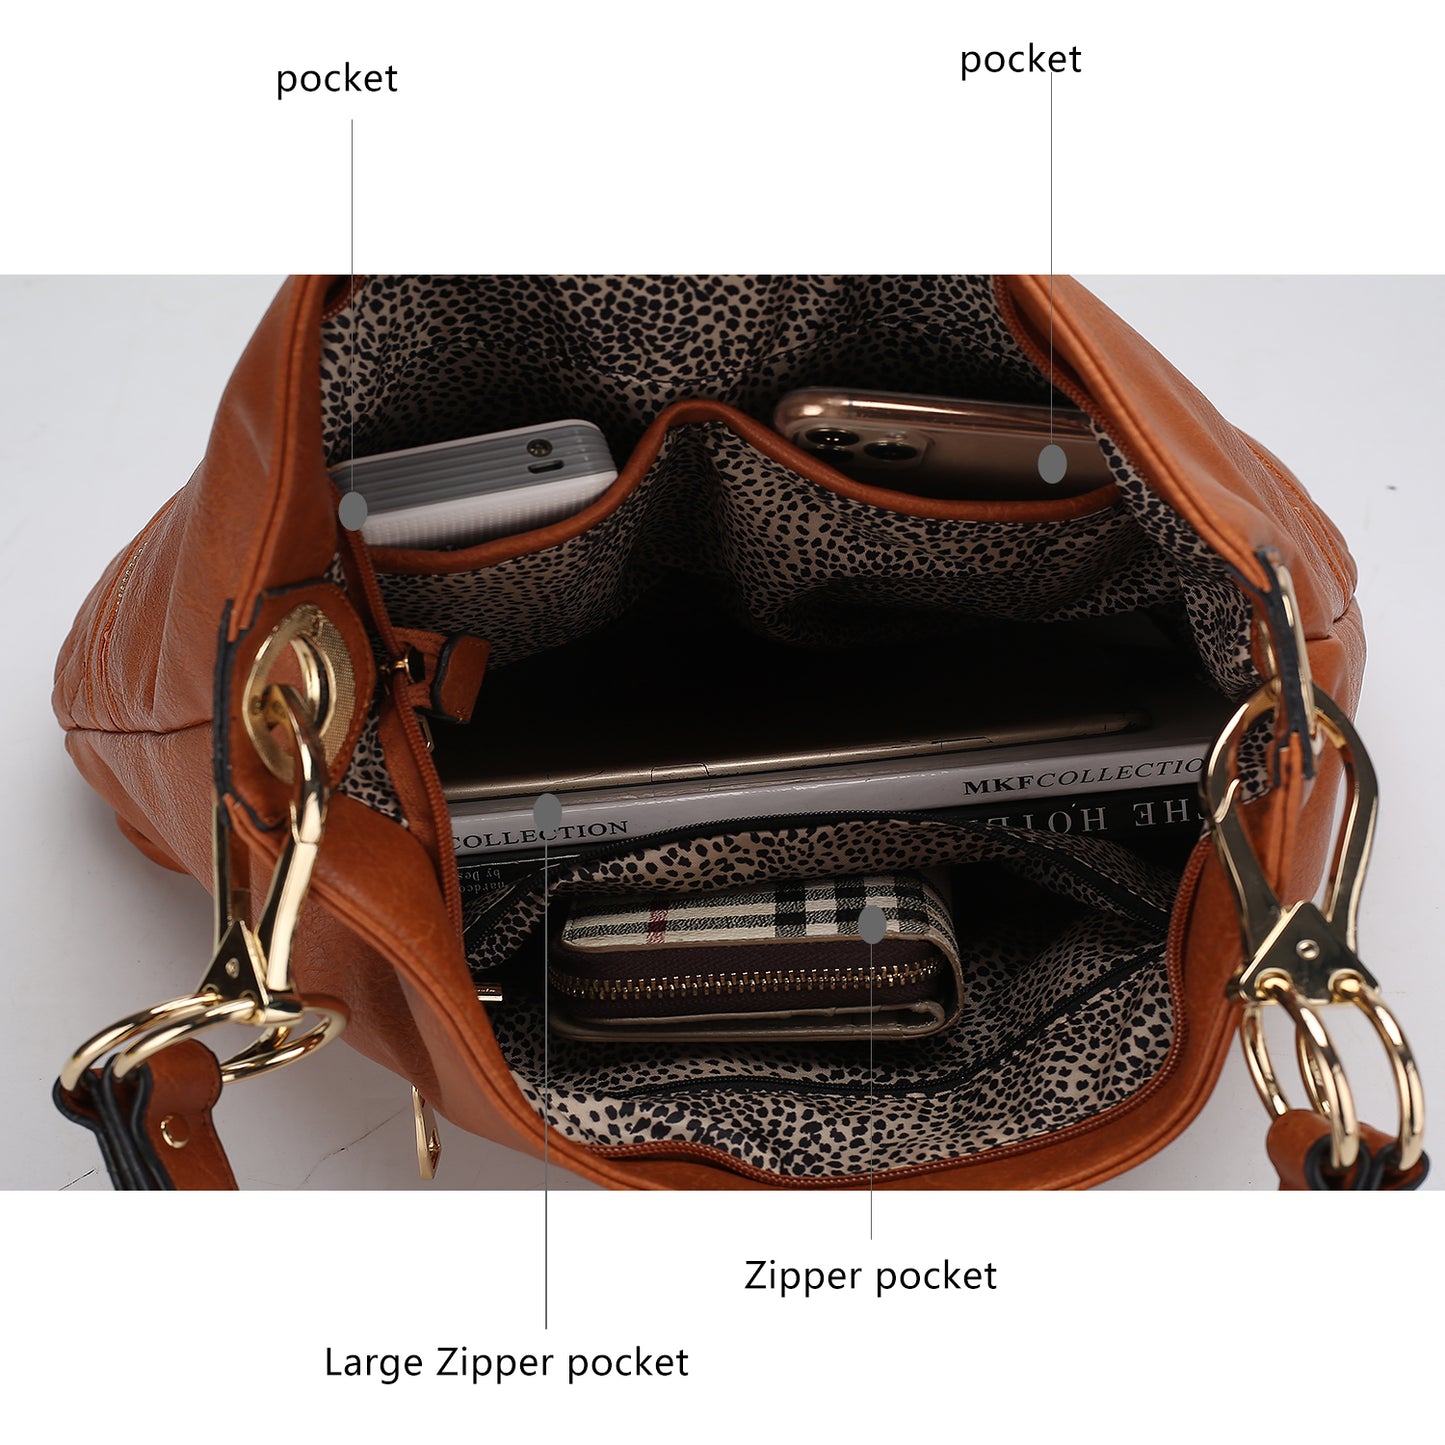 A stylish Dalila Vegan Leather Women Shoulder Handbag made with vegan leather, containing the essential contents of a purse, including a cell phone, from the brand Pink Orpheus.